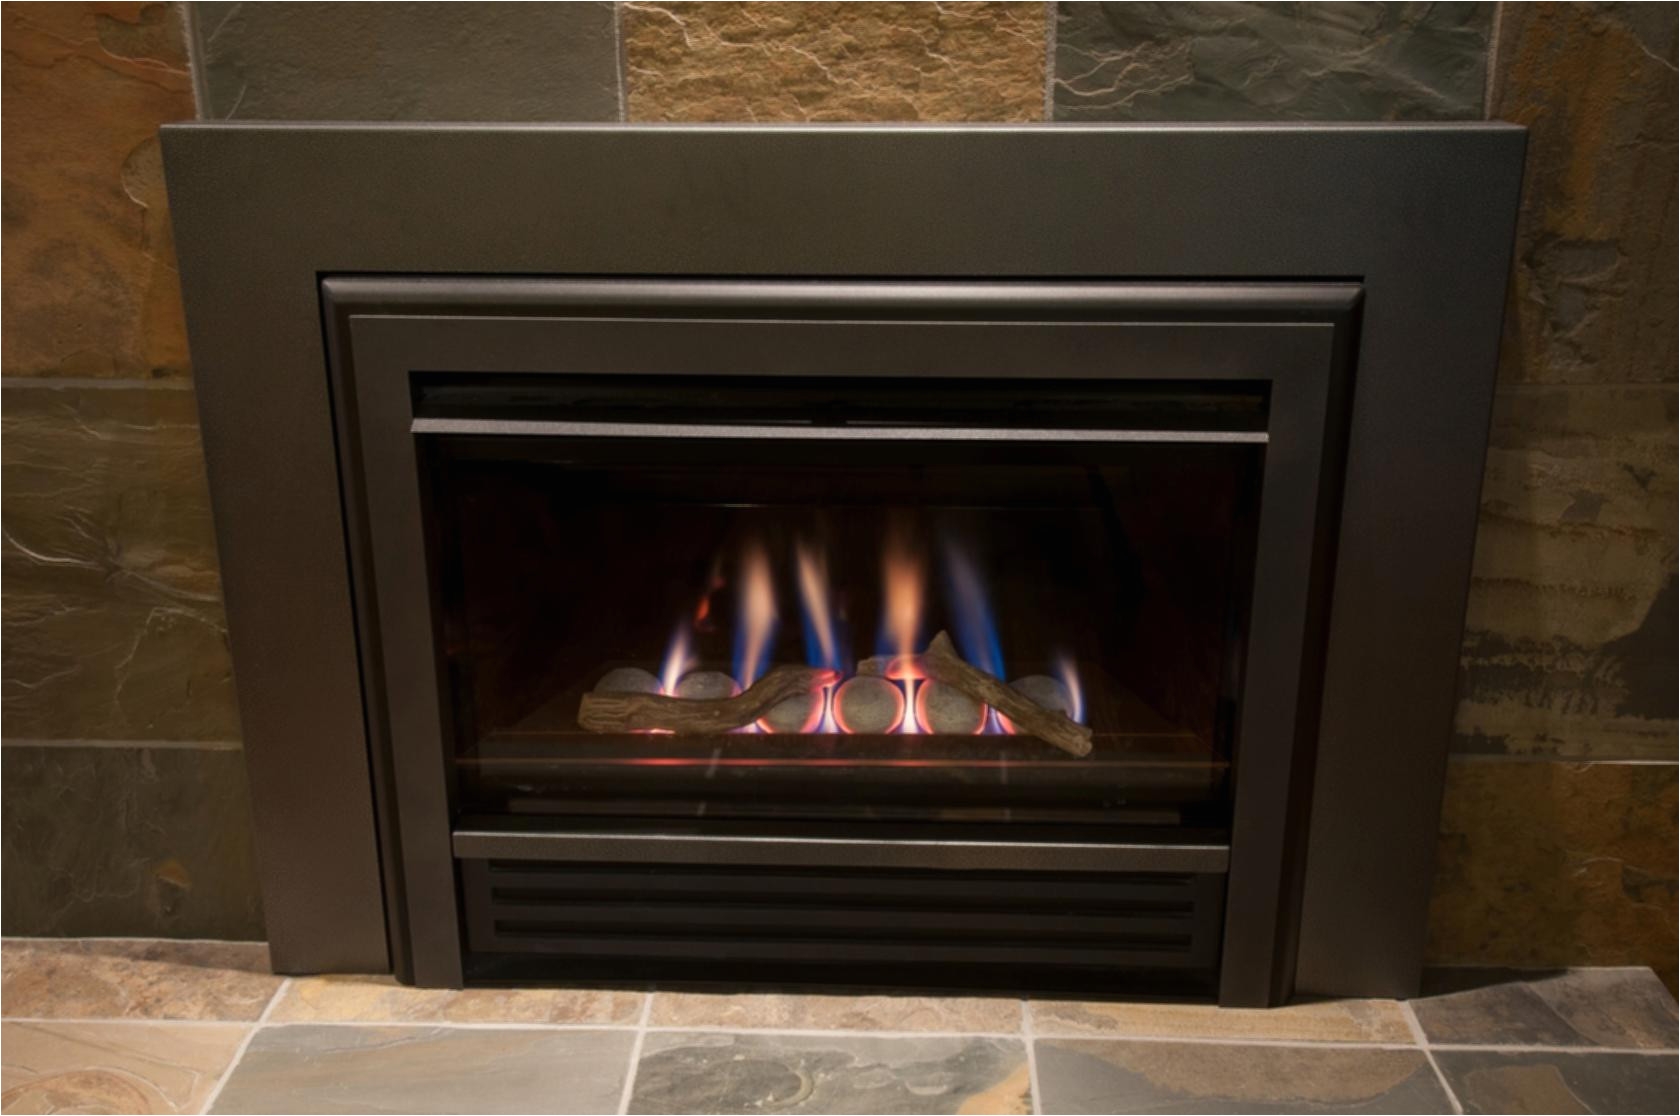 heat n glo fireplace parts heatilator fireplace troubleshooting awesome gas fireplace parts of heat n glo fireplace parts